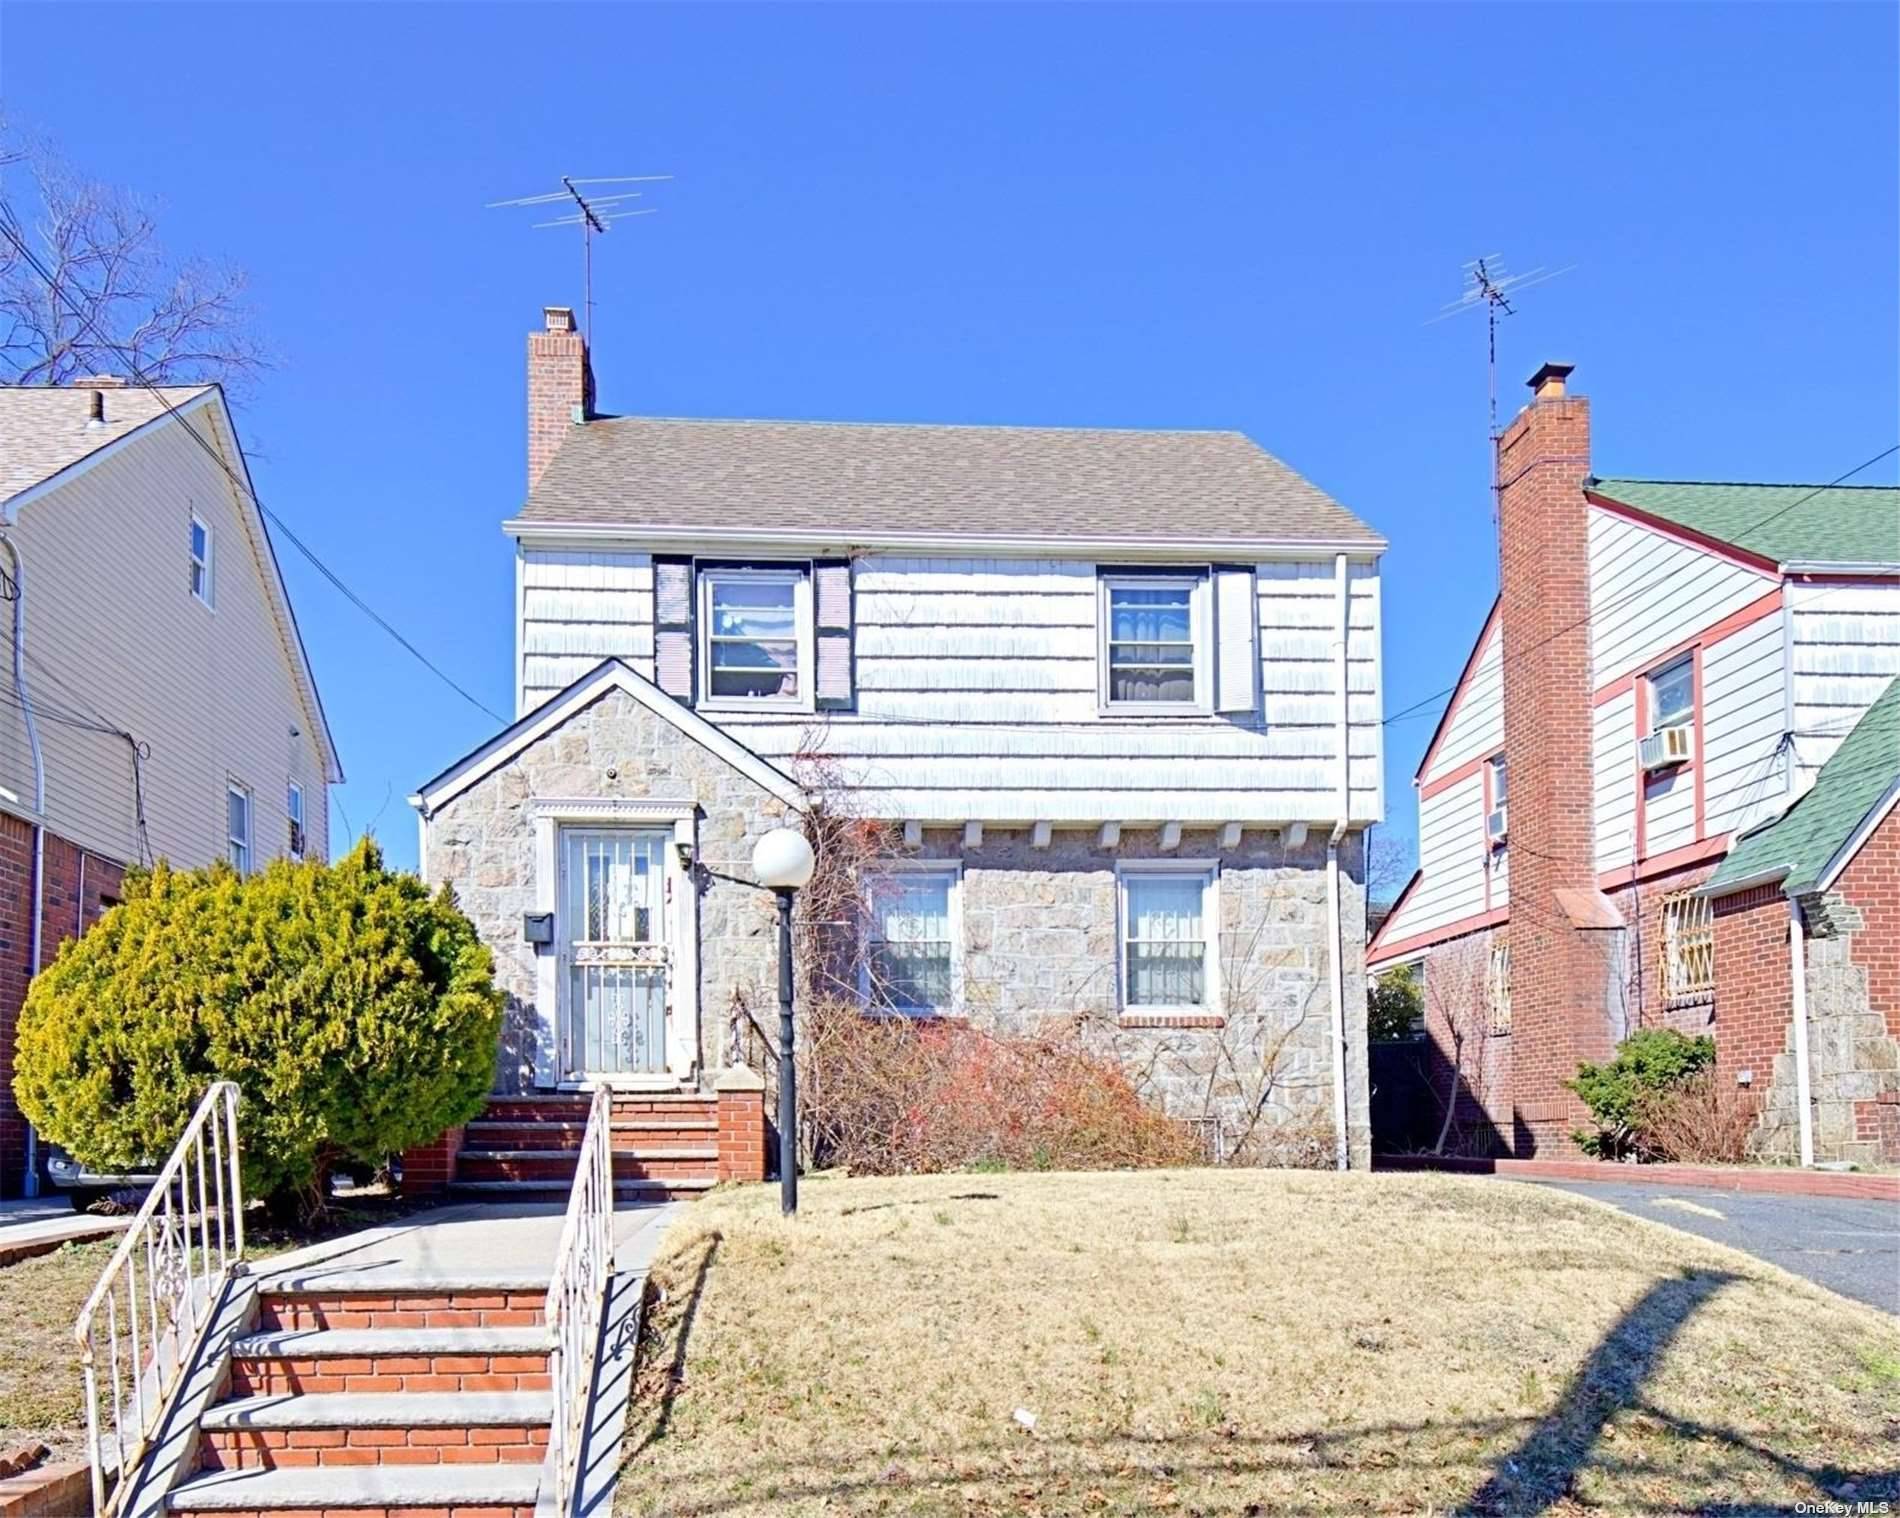 This Colonial Home Features 3 Bedrooms, 1.